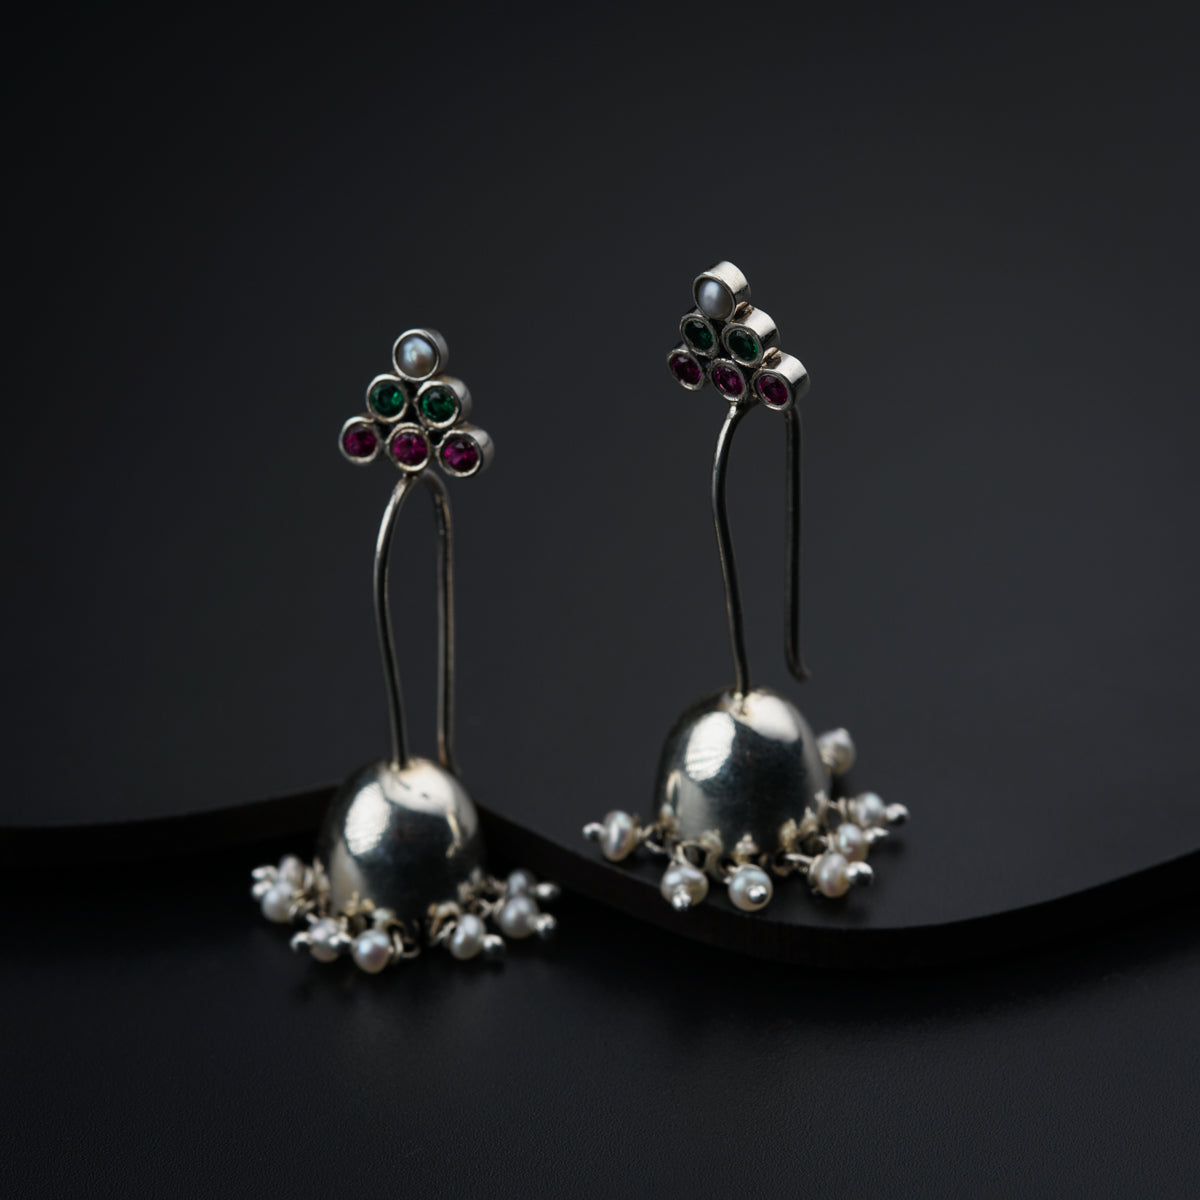 a pair of silver earrings with flowers and pearls